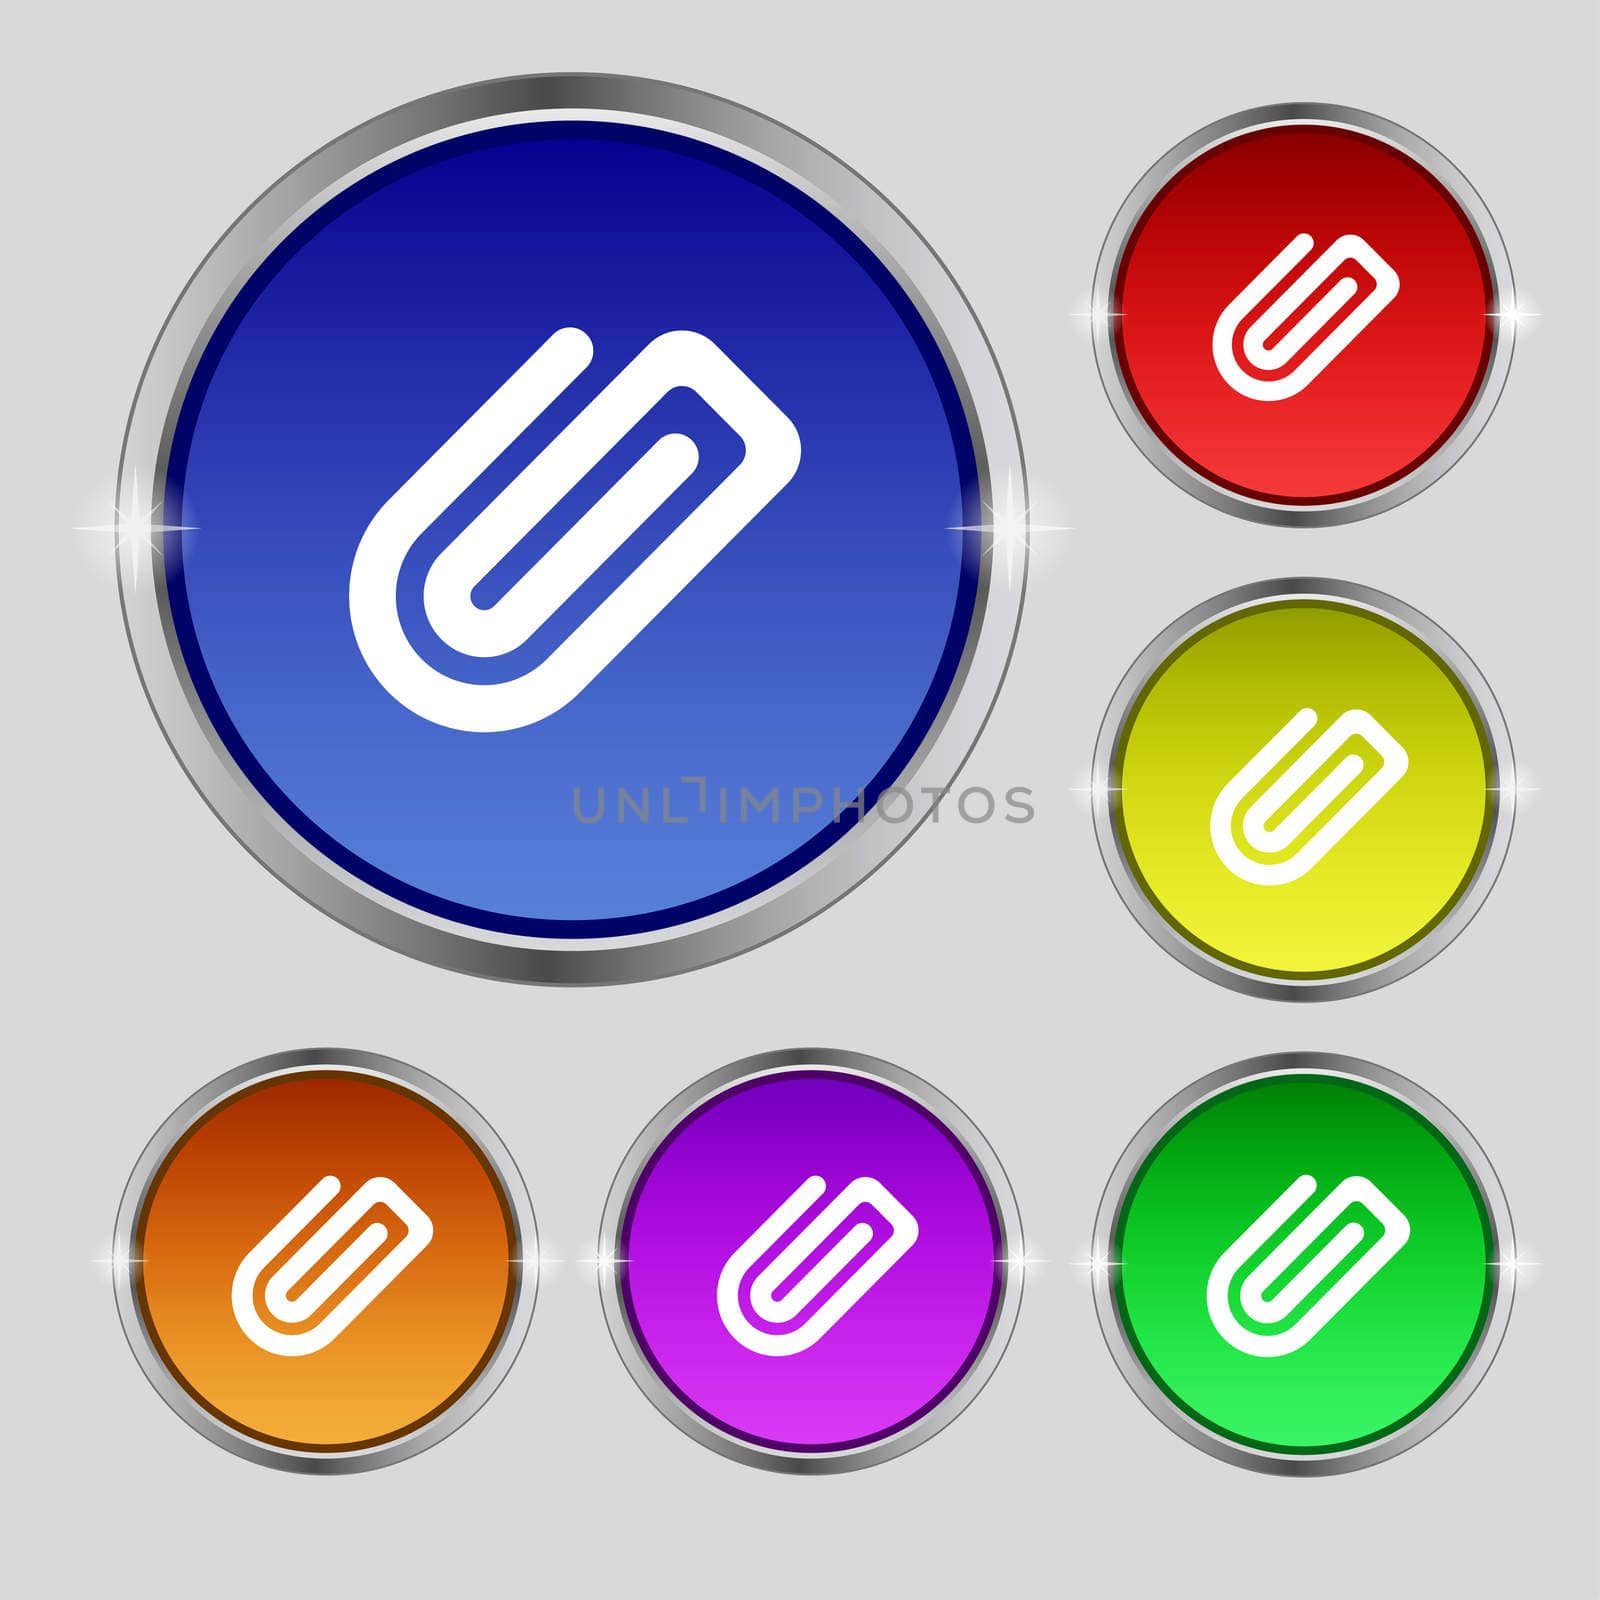 Paper Clip icon sign. Round symbol on bright colourful buttons.  by serhii_lohvyniuk